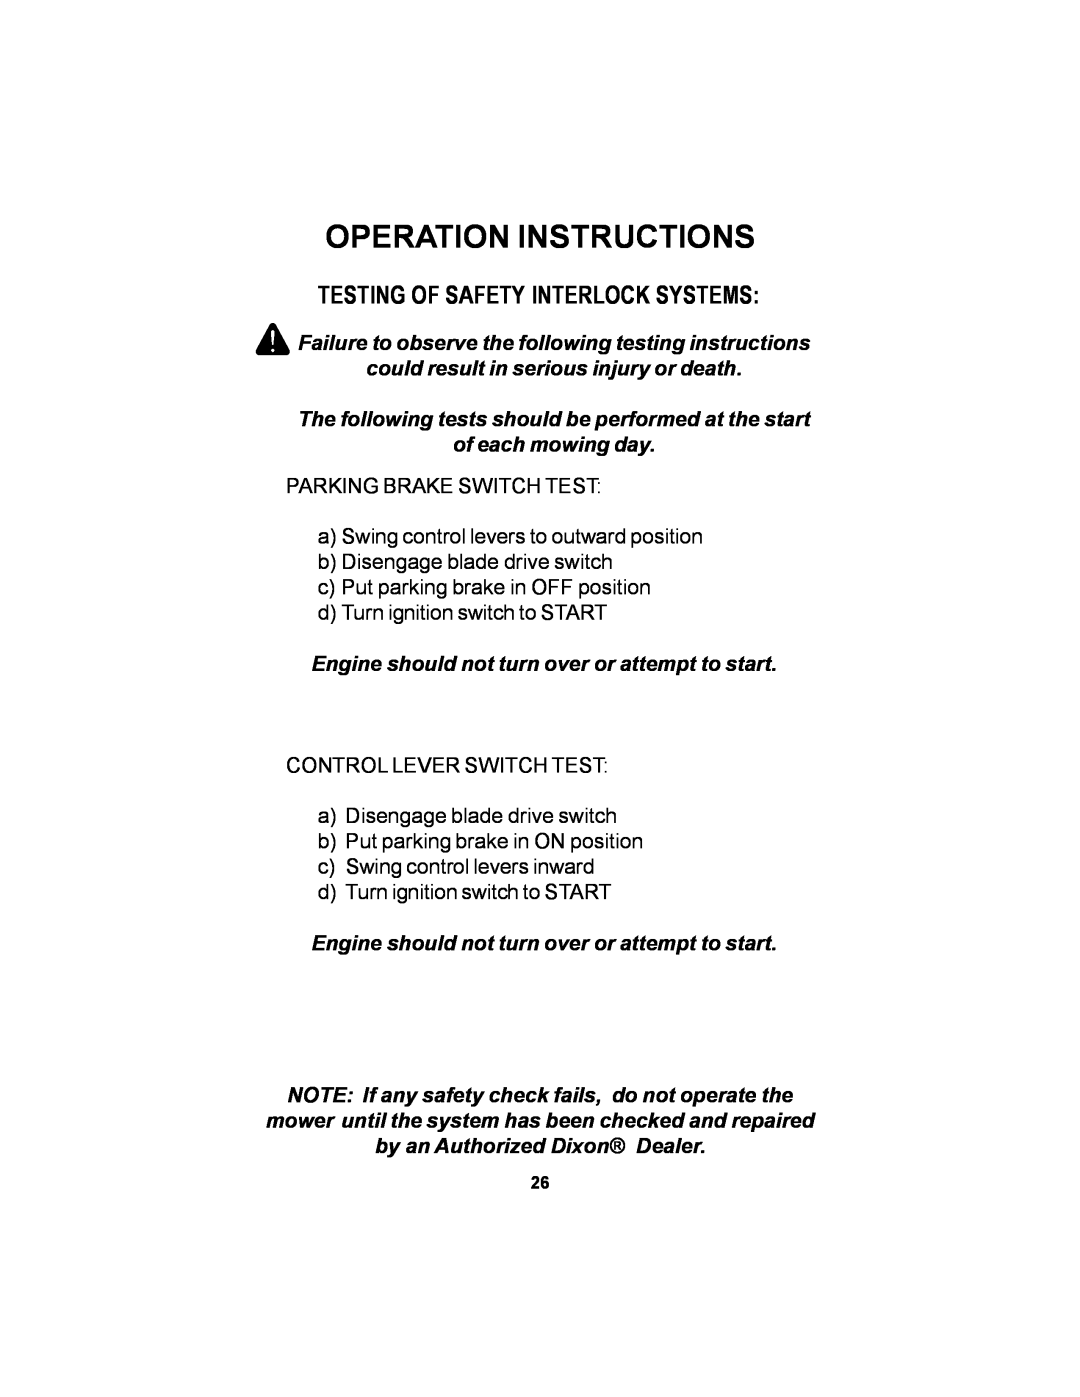 Dixon 36 manual Testing Of Safety Interlock Systems, Operation Instructions 